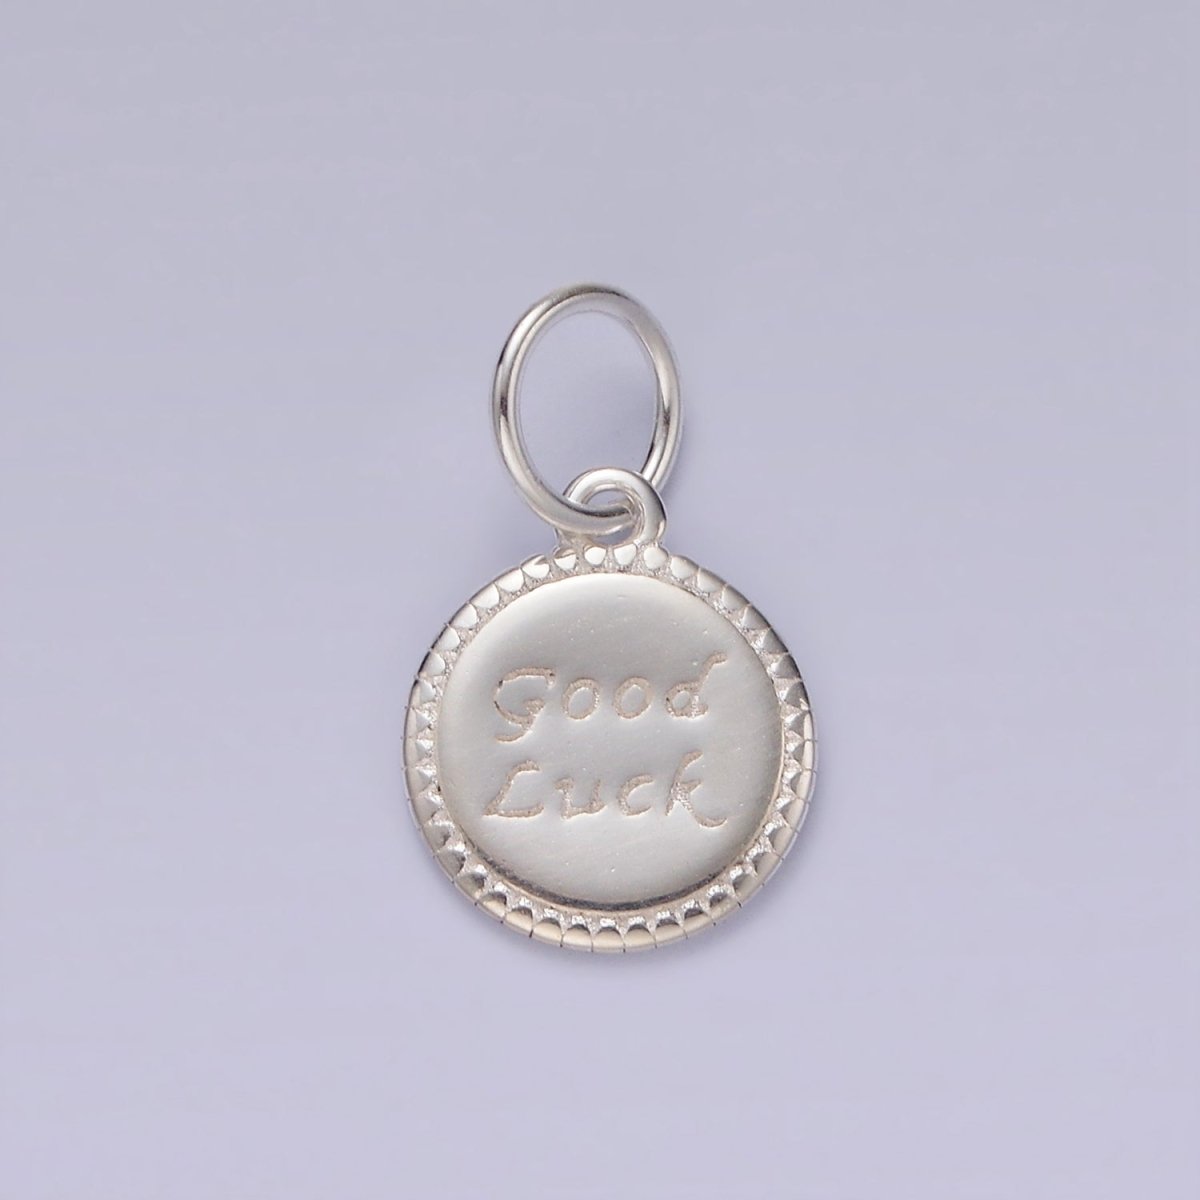 S925 Sterling Silver "Good Luck" Script Engraved Round Charm | SL-434 - DLUXCA